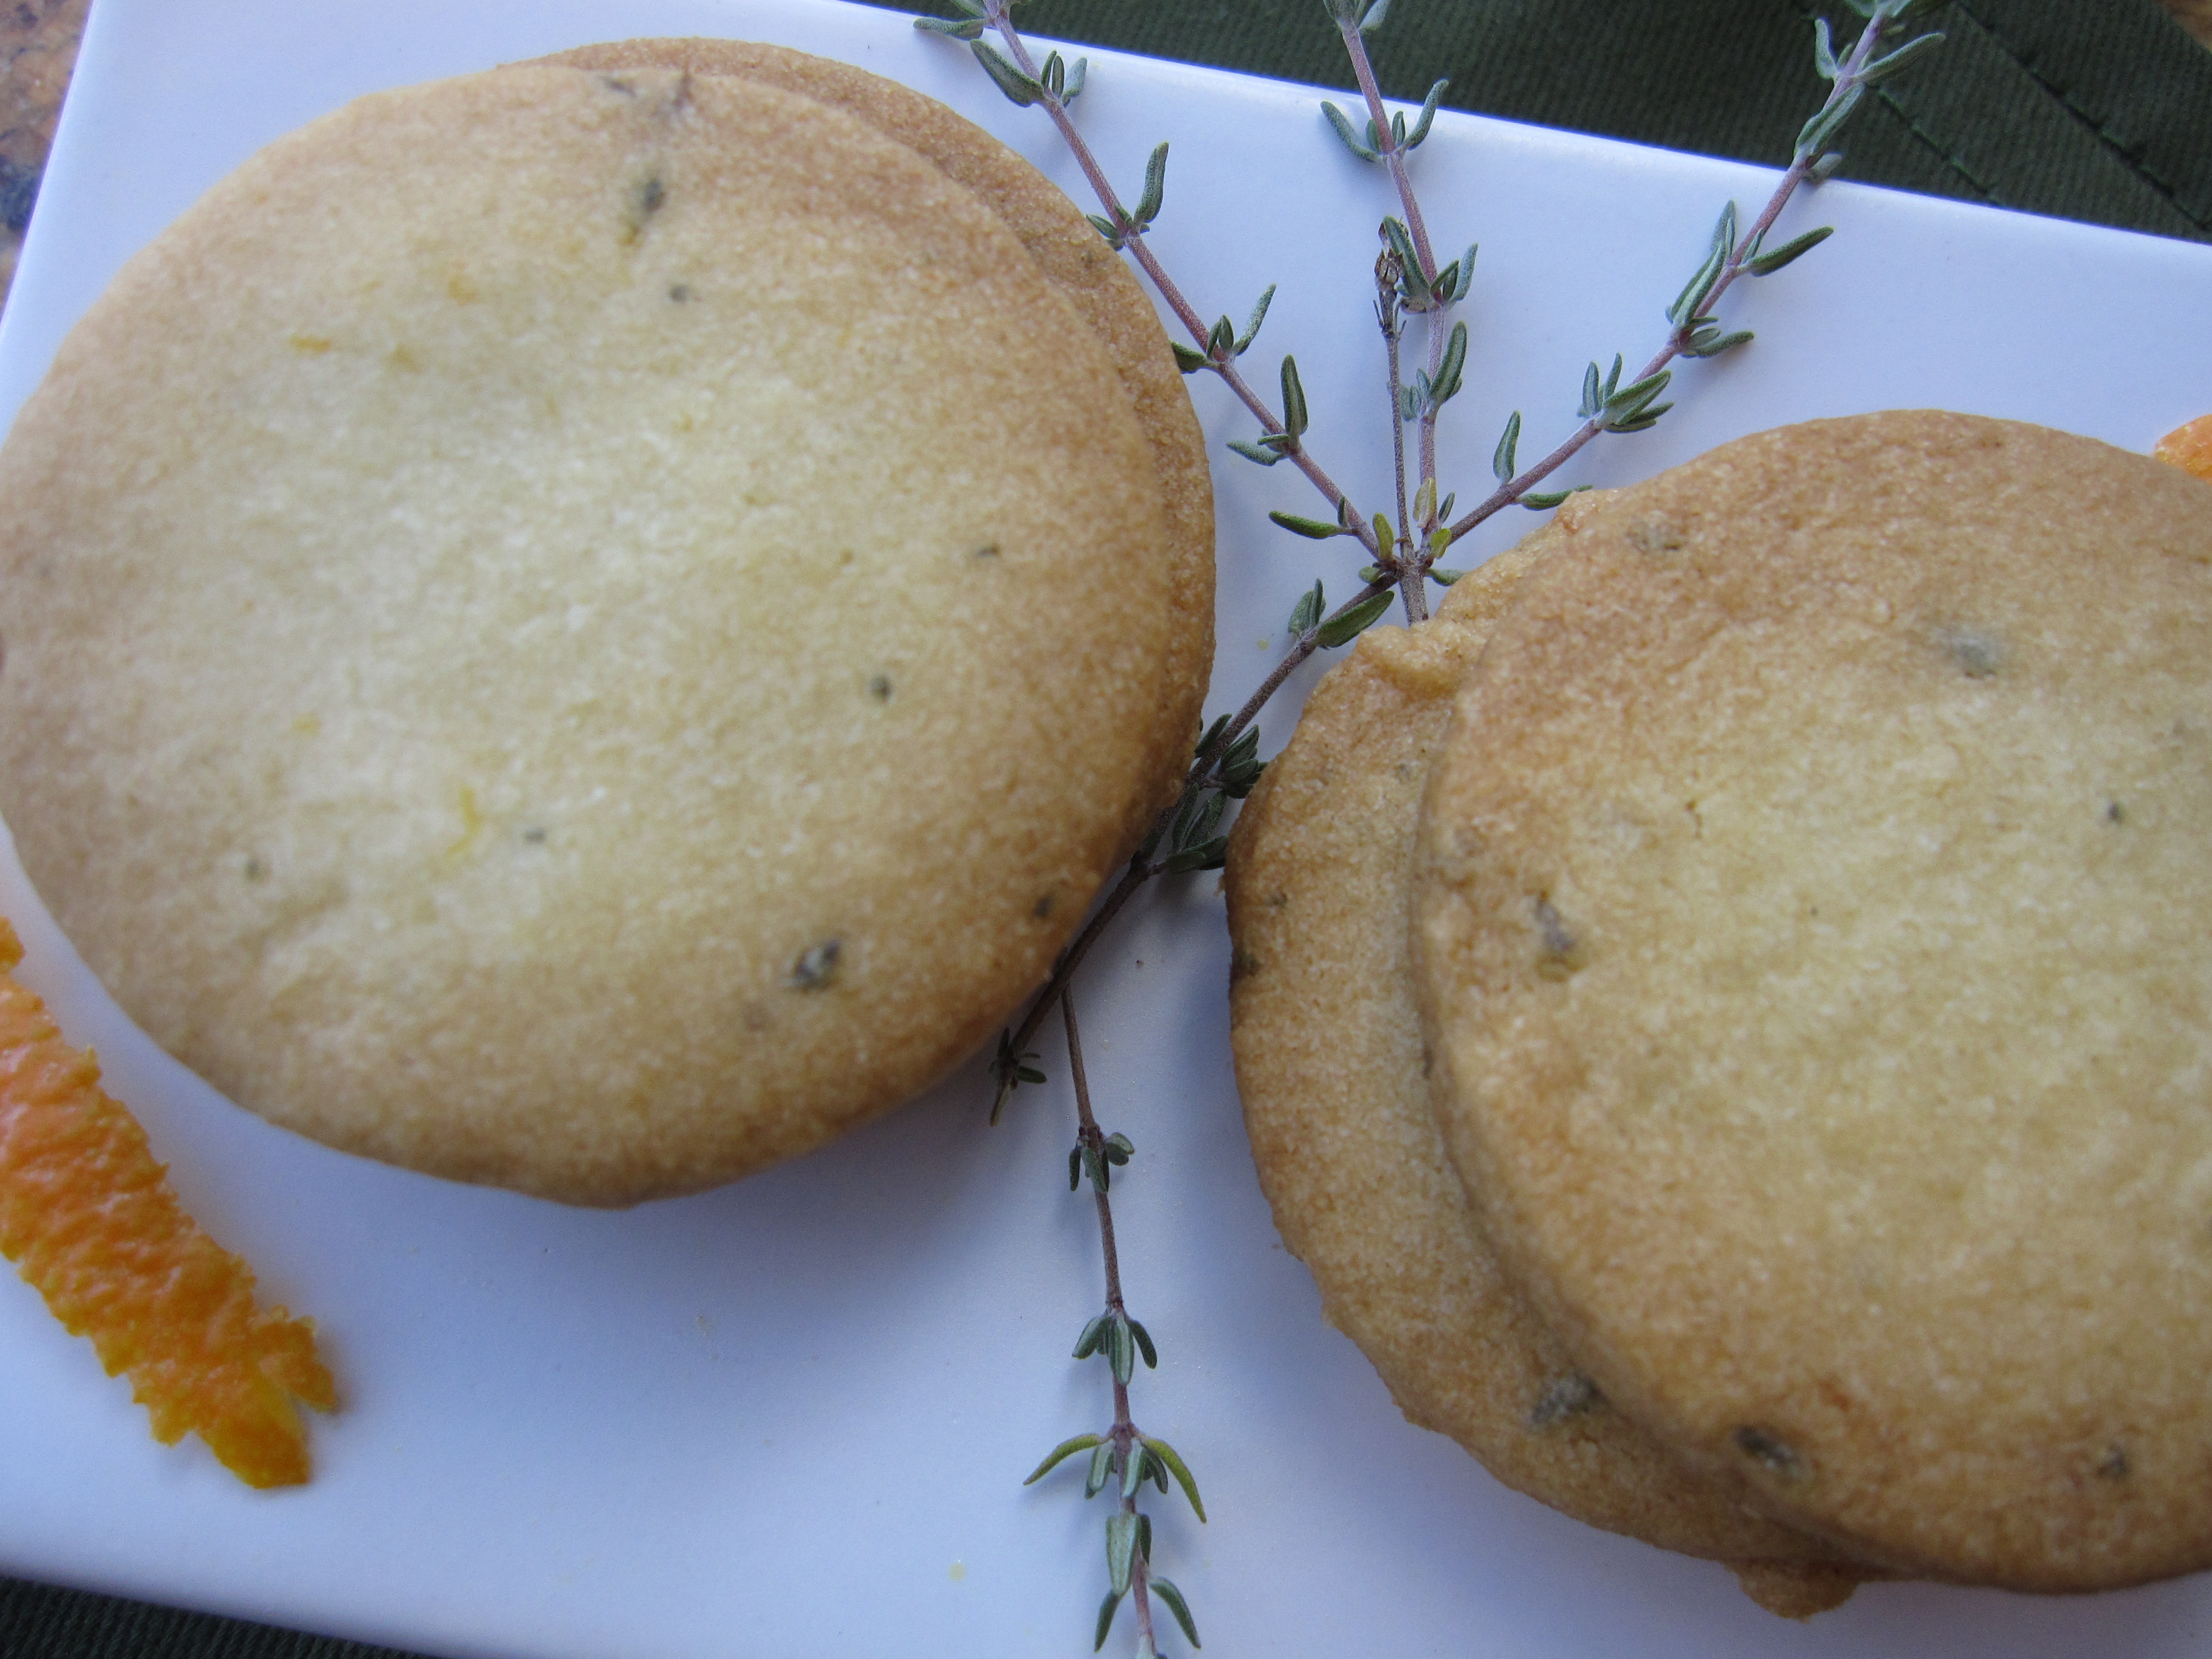 Baked Orange Thyme Cocktail Cookies with a fresh thyme garnish.